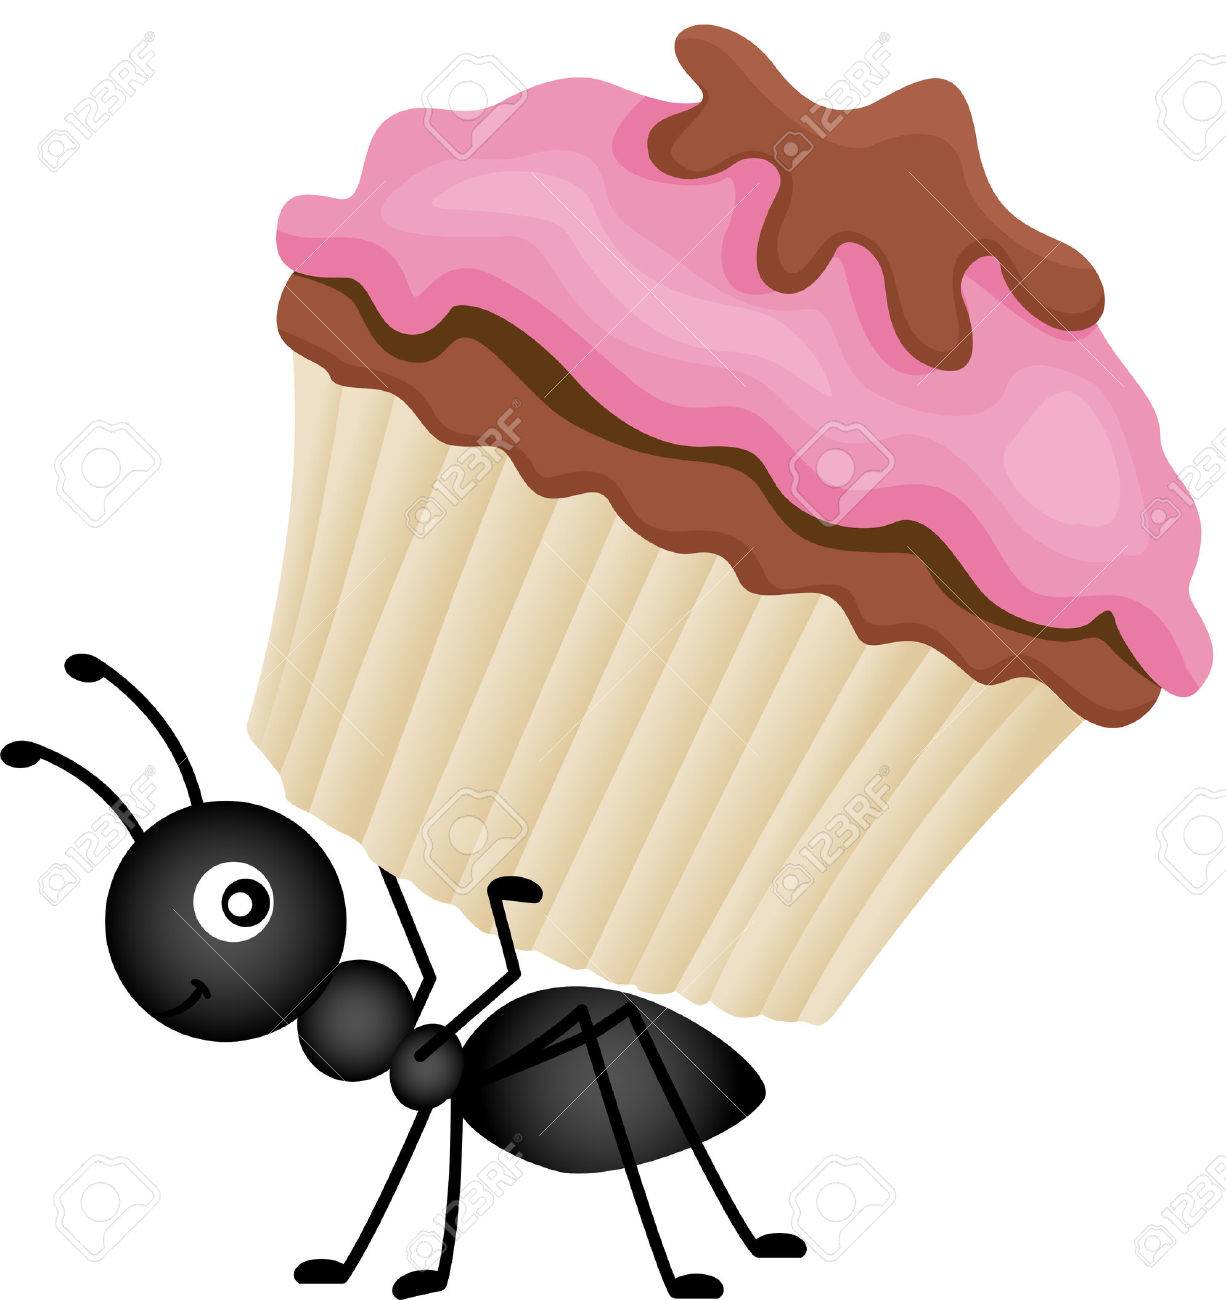 Ants Carrying Food Clipart.